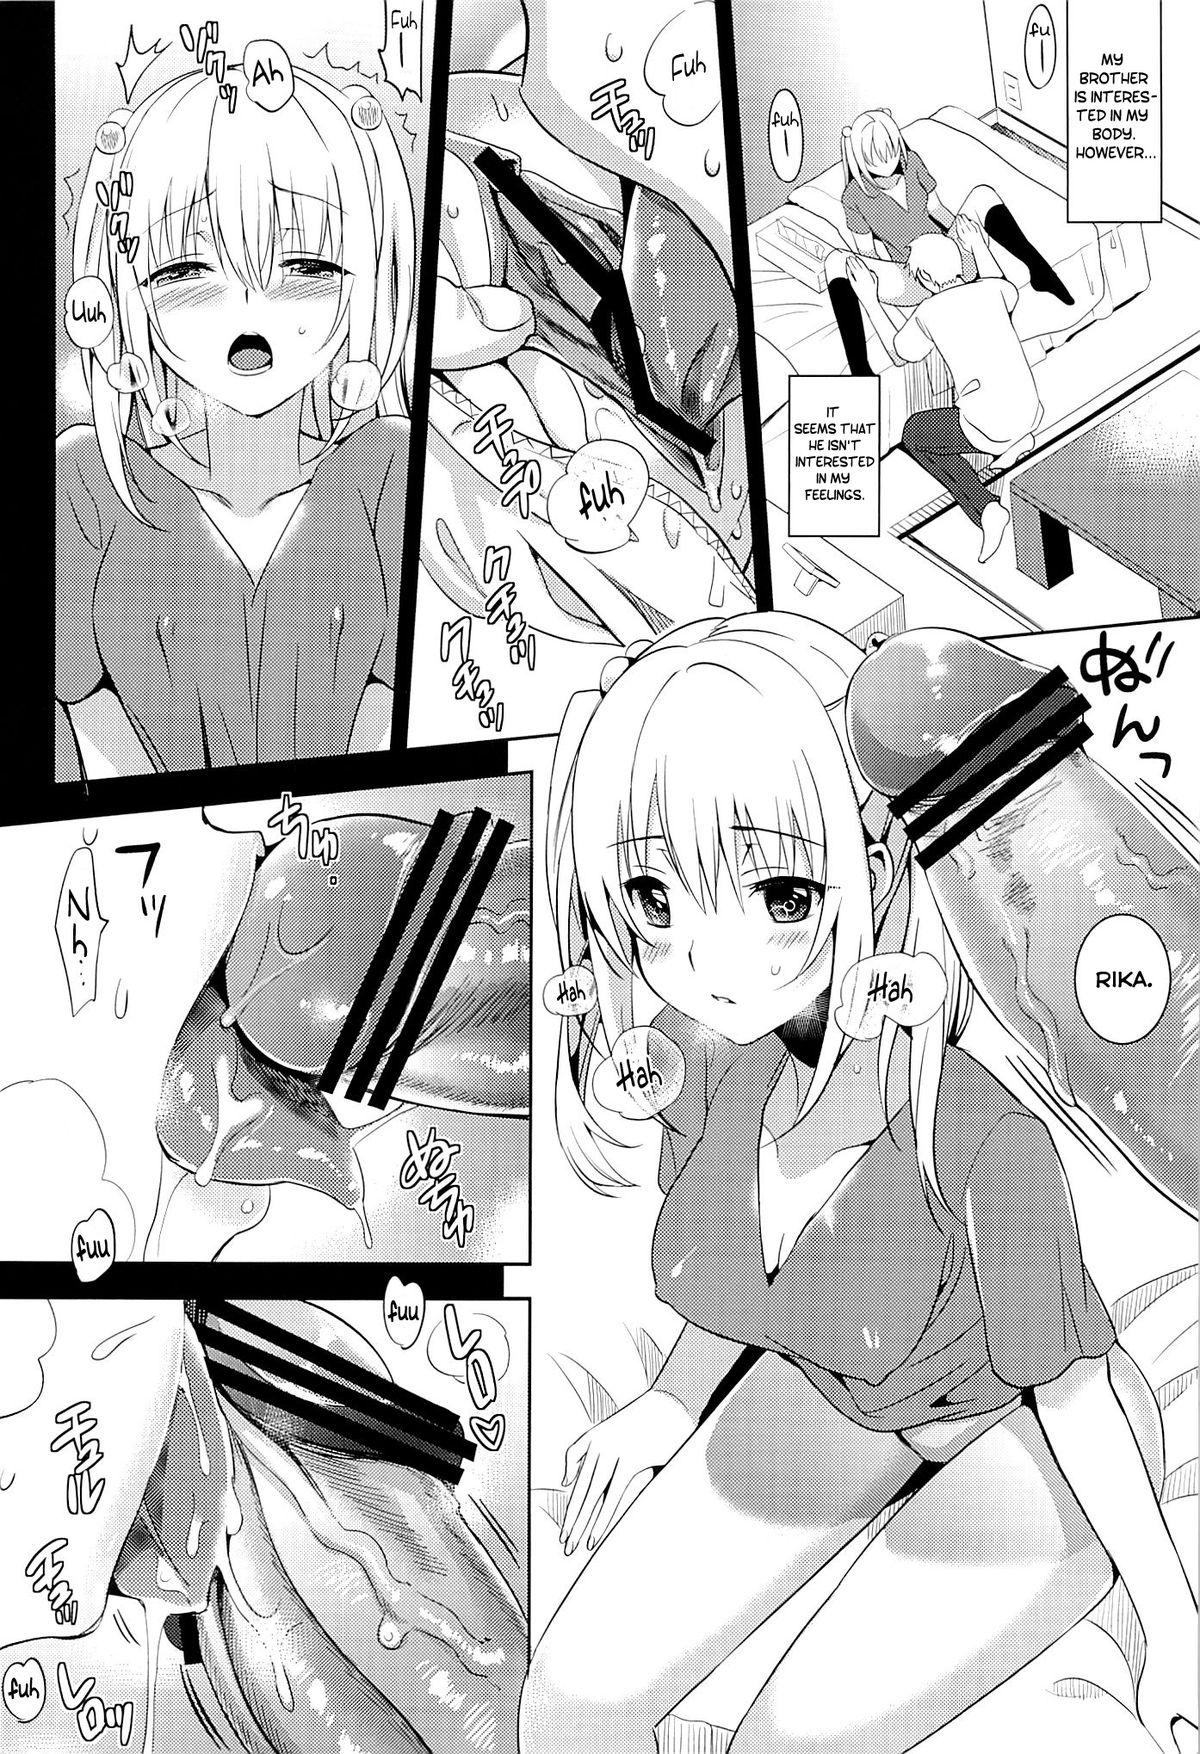 European IMOUTO COLLECTION Public Nudity - Page 6